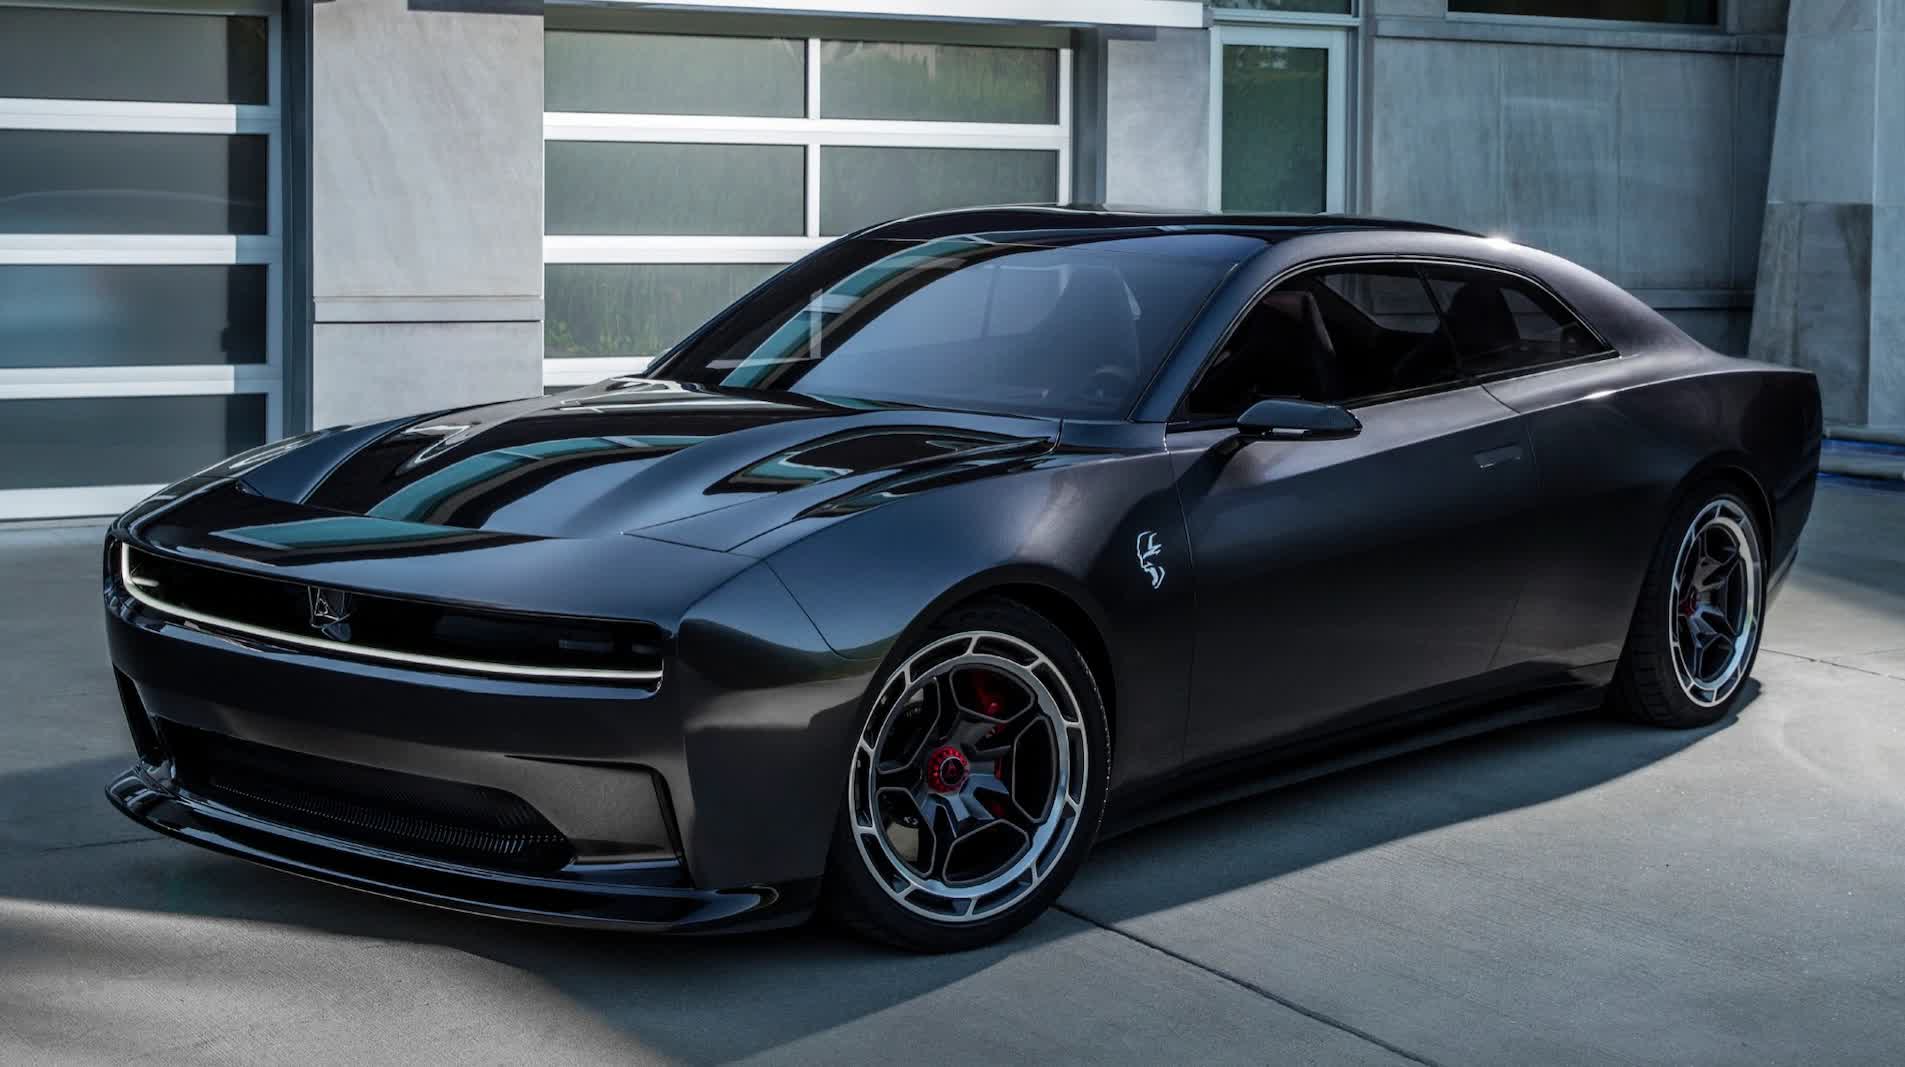 Dodge previews the Charger Daytona SRT Concept, an EV that's clinging to the past